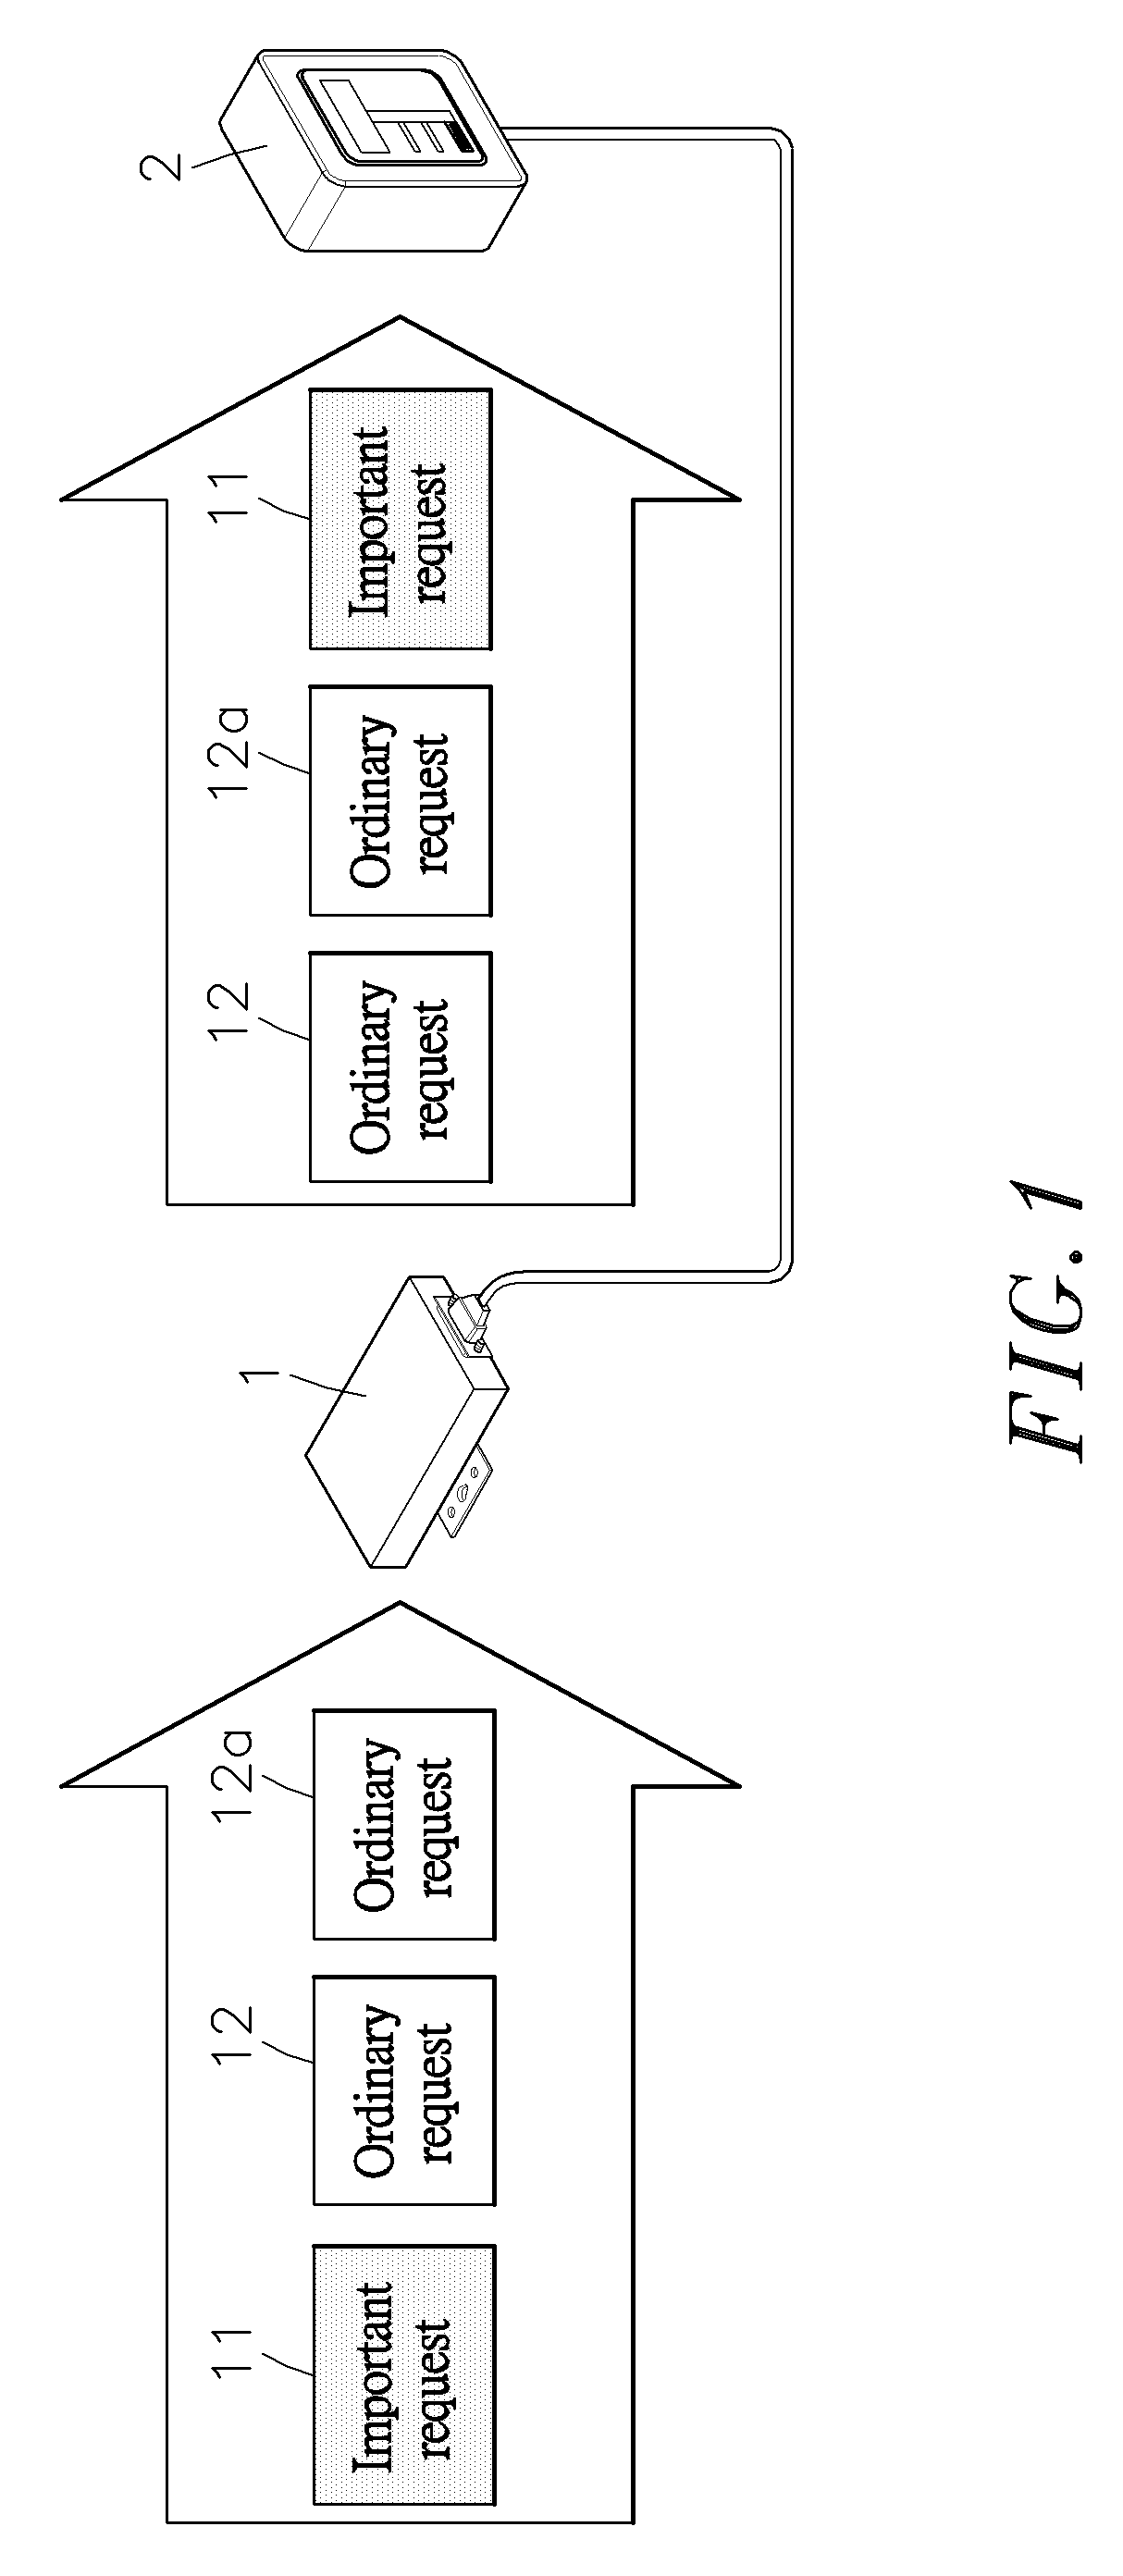 Method of determing request transmission priority subject to request source and transtting request subject to such request transmission priority in application of fieldbus communication framework